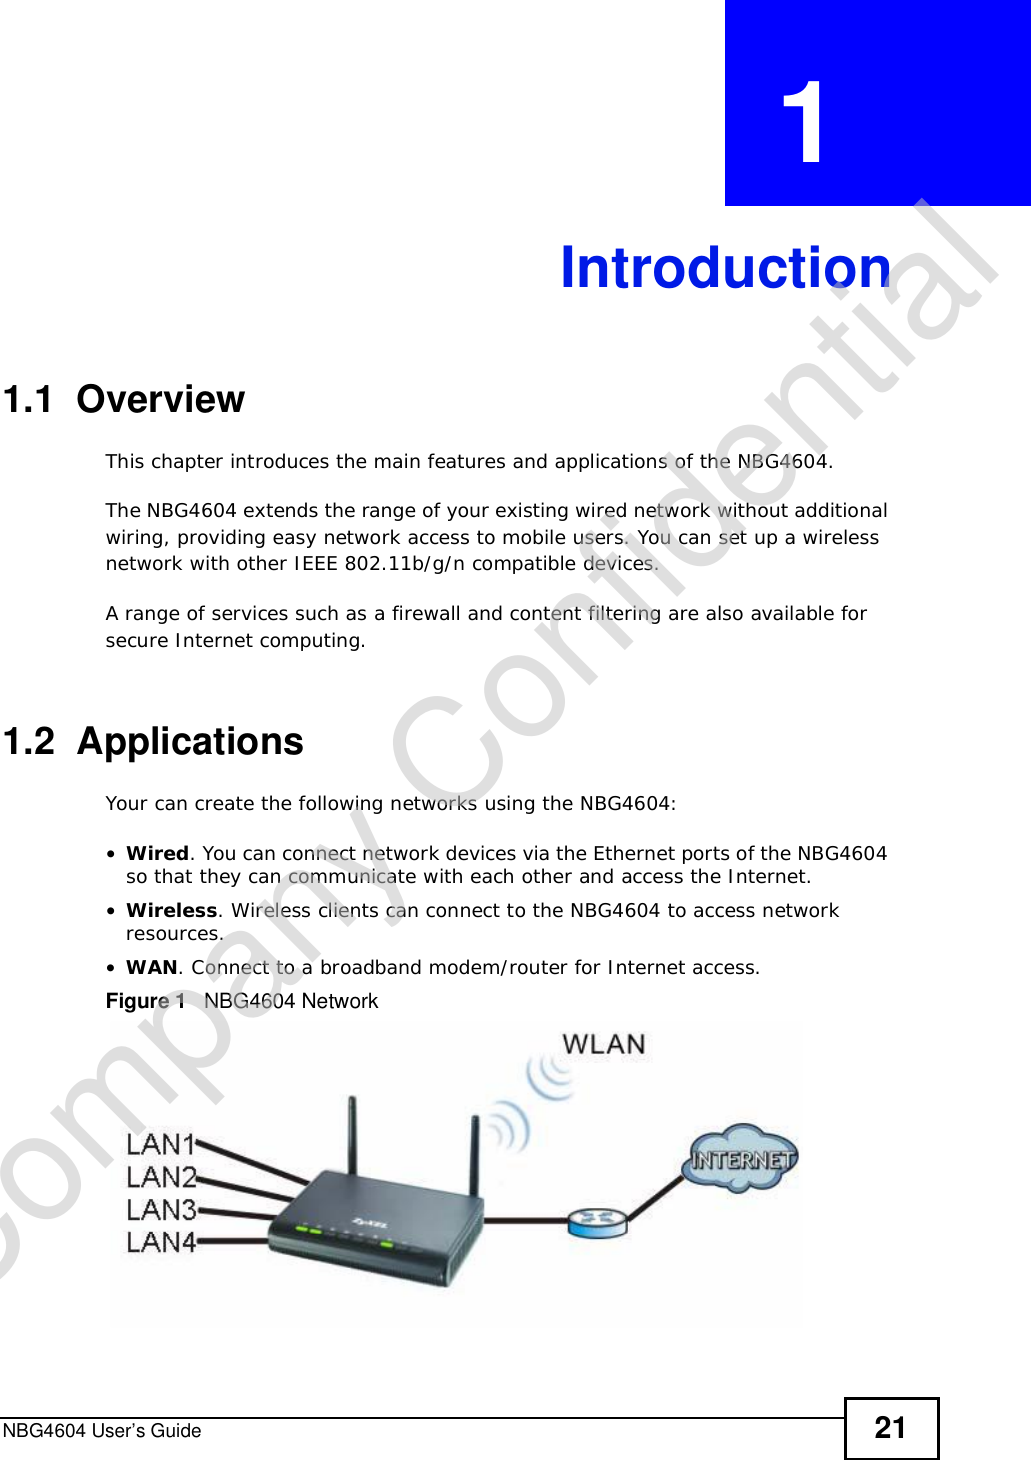 NBG4604 User’s Guide 21CHAPTER  1 Introduction1.1  OverviewThis chapter introduces the main features and applications of the NBG4604.The NBG4604 extends the range of your existing wired network without additional wiring, providing easy network access to mobile users. You can set up a wireless network with other IEEE 802.11b/g/n compatible devices.A range of services such as a firewall and content filtering are also available for secure Internet computing.1.2  ApplicationsYour can create the following networks using the NBG4604:•Wired. You can connect network devices via the Ethernet ports of the NBG4604 so that they can communicate with each other and access the Internet.•Wireless. Wireless clients can connect to the NBG4604 to access network resources.•WAN. Connect to a broadband modem/router for Internet access.Figure 1   NBG4604 NetworkCompany Confidential